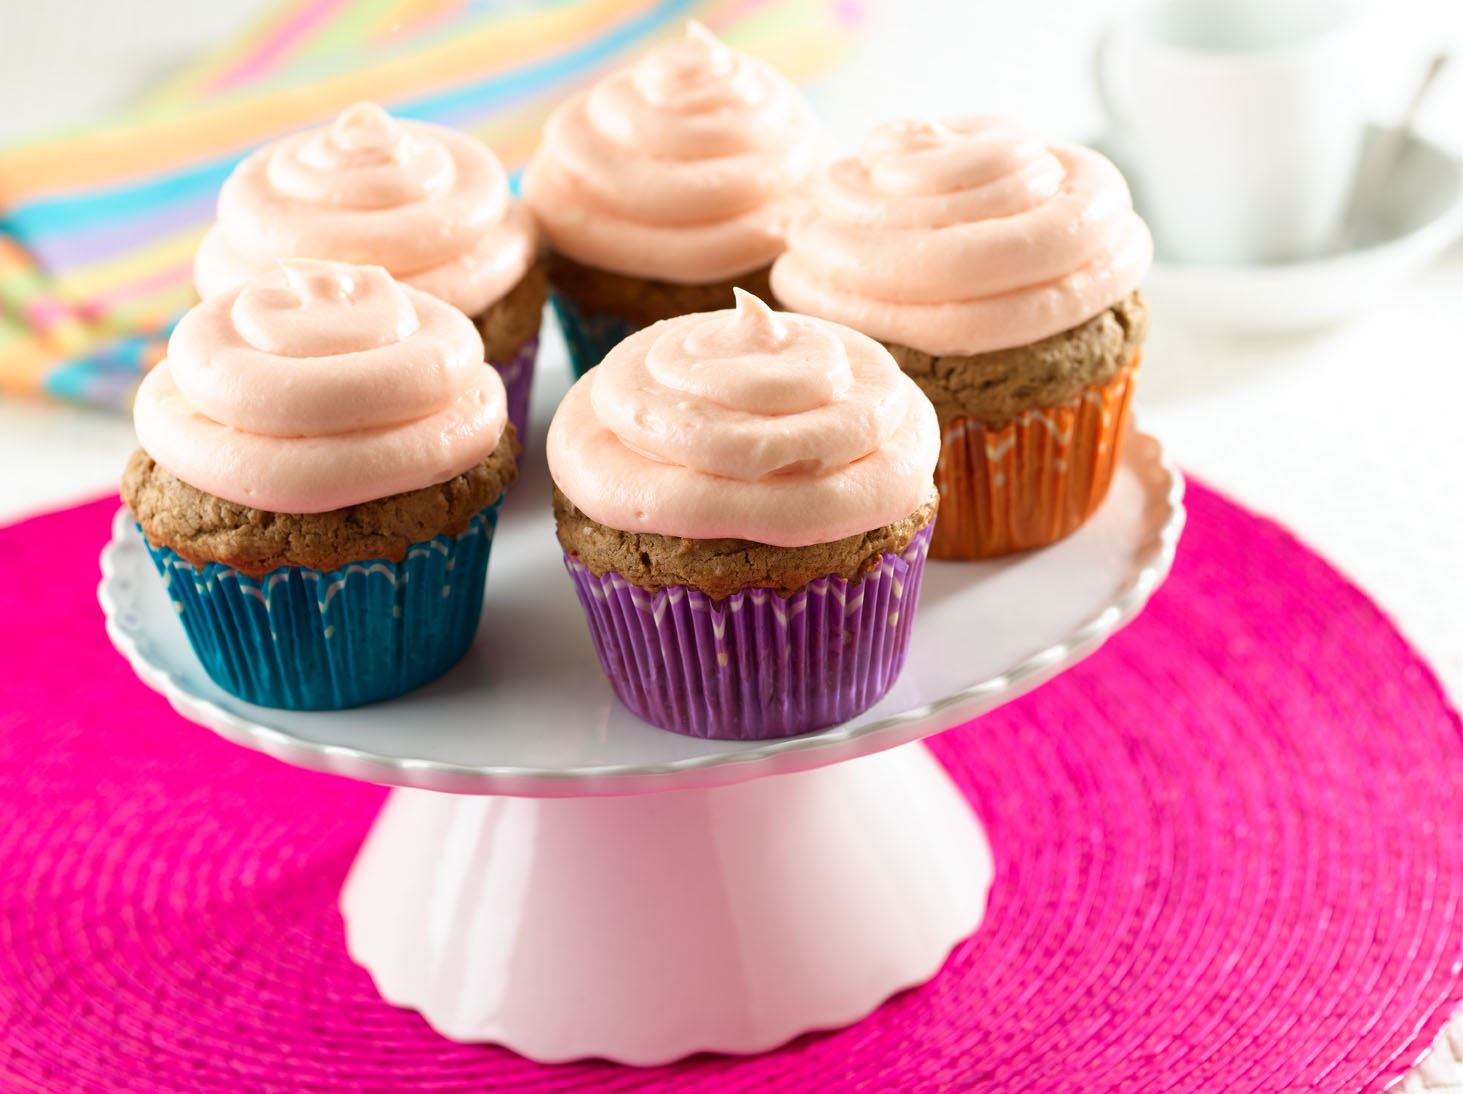 Black Bean Cupcakes with Guava Frosting